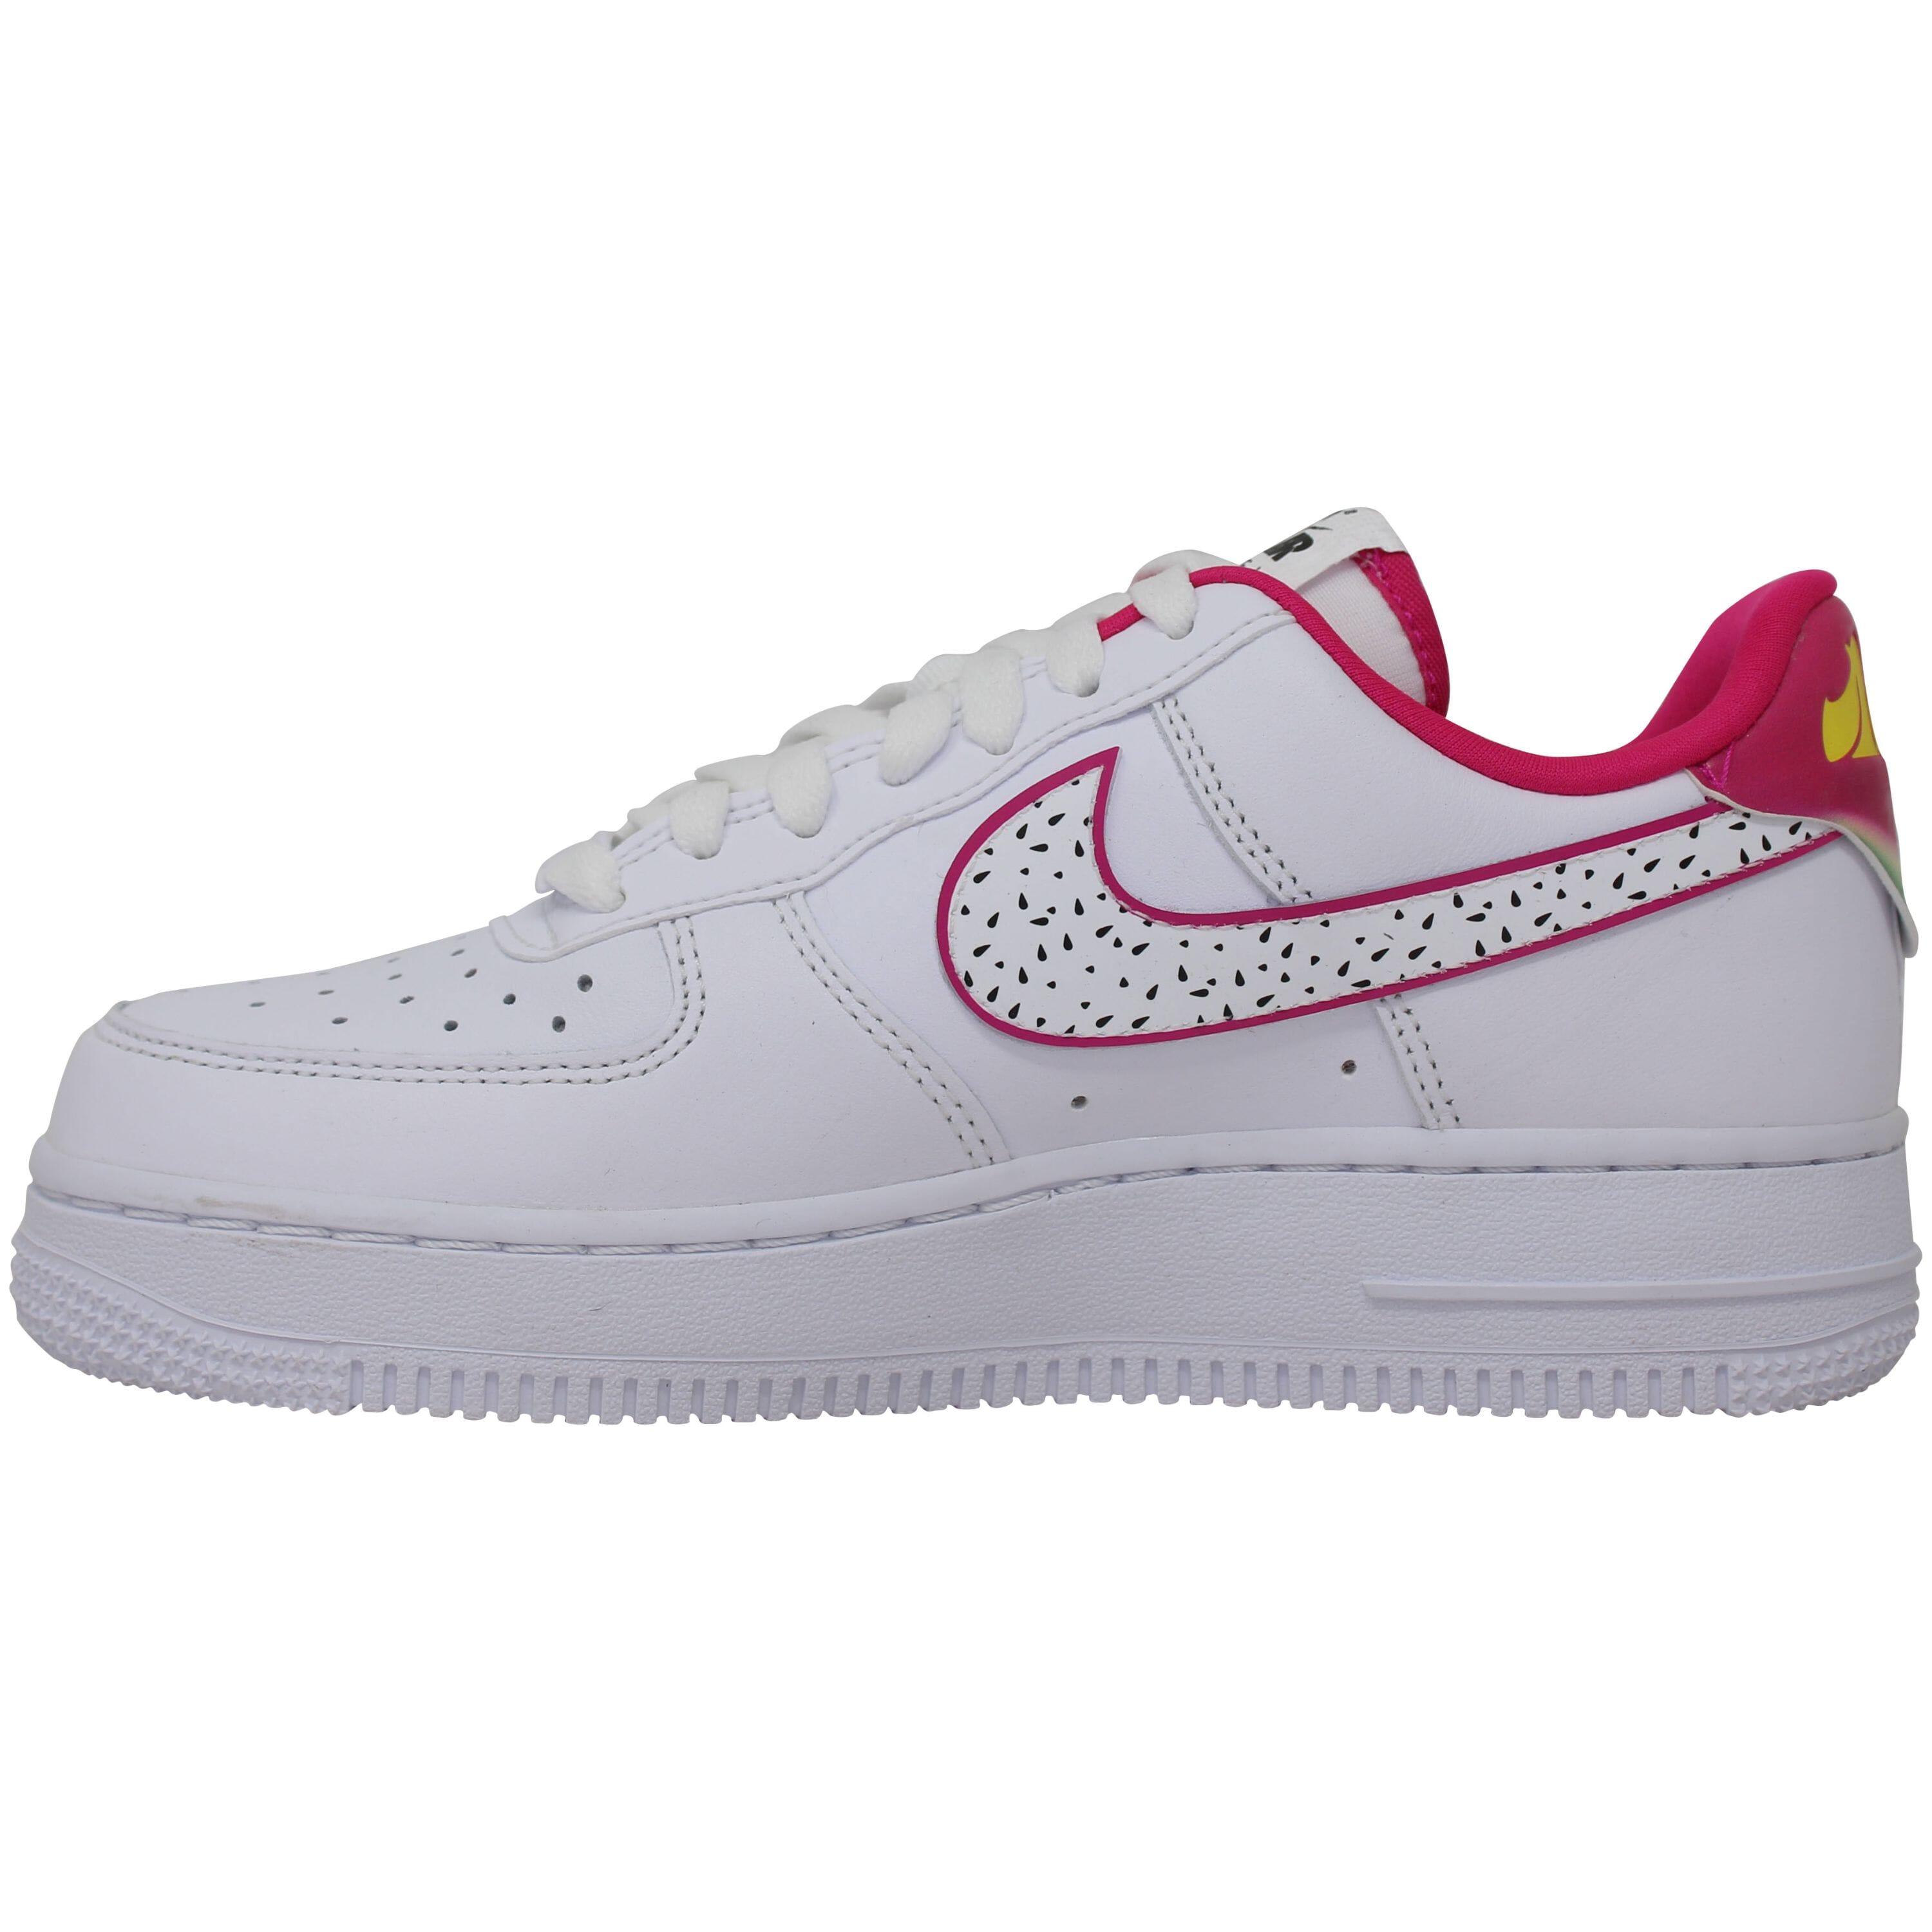 Nike Air Force 1 '07 Lx /-pink Prime Dv3809-100 in Gray | Lyst